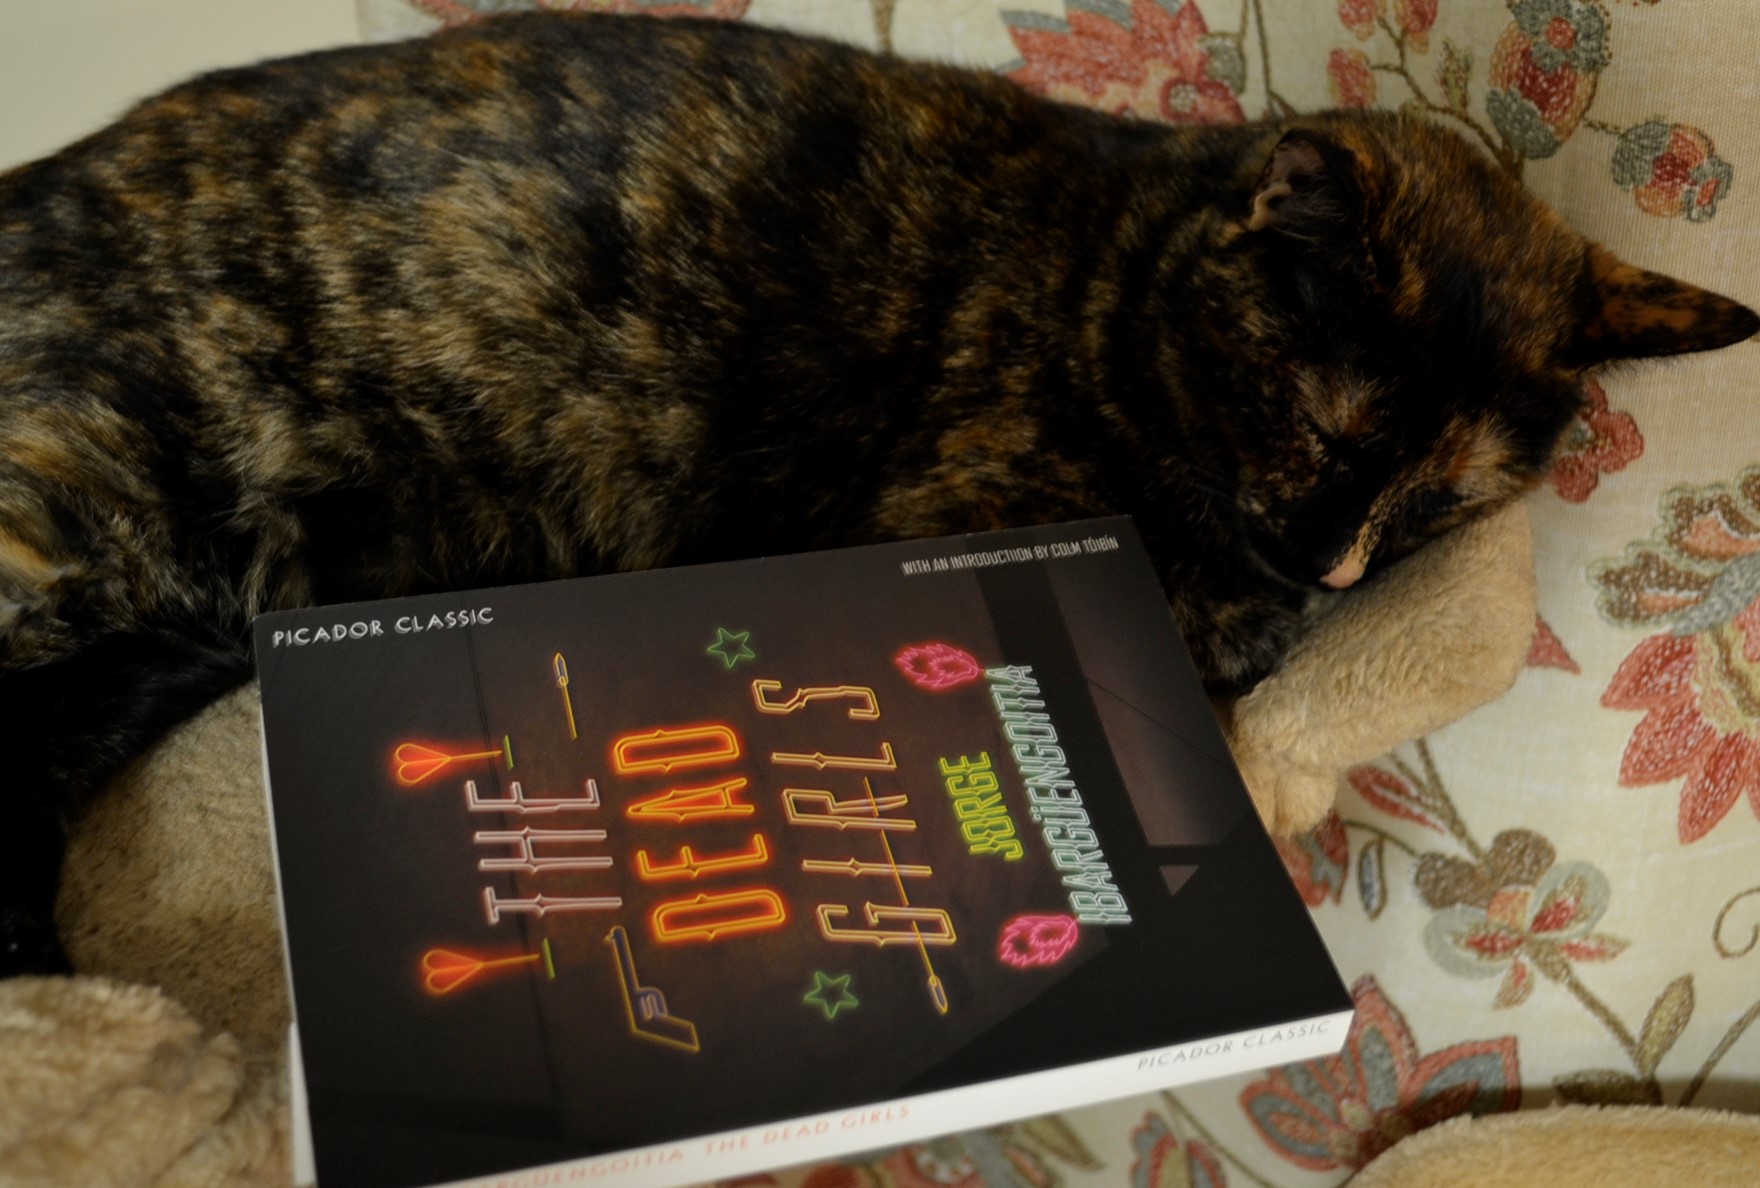 A sleeping tortoiseshell cat and a cover that says The Dead Girls in neon.